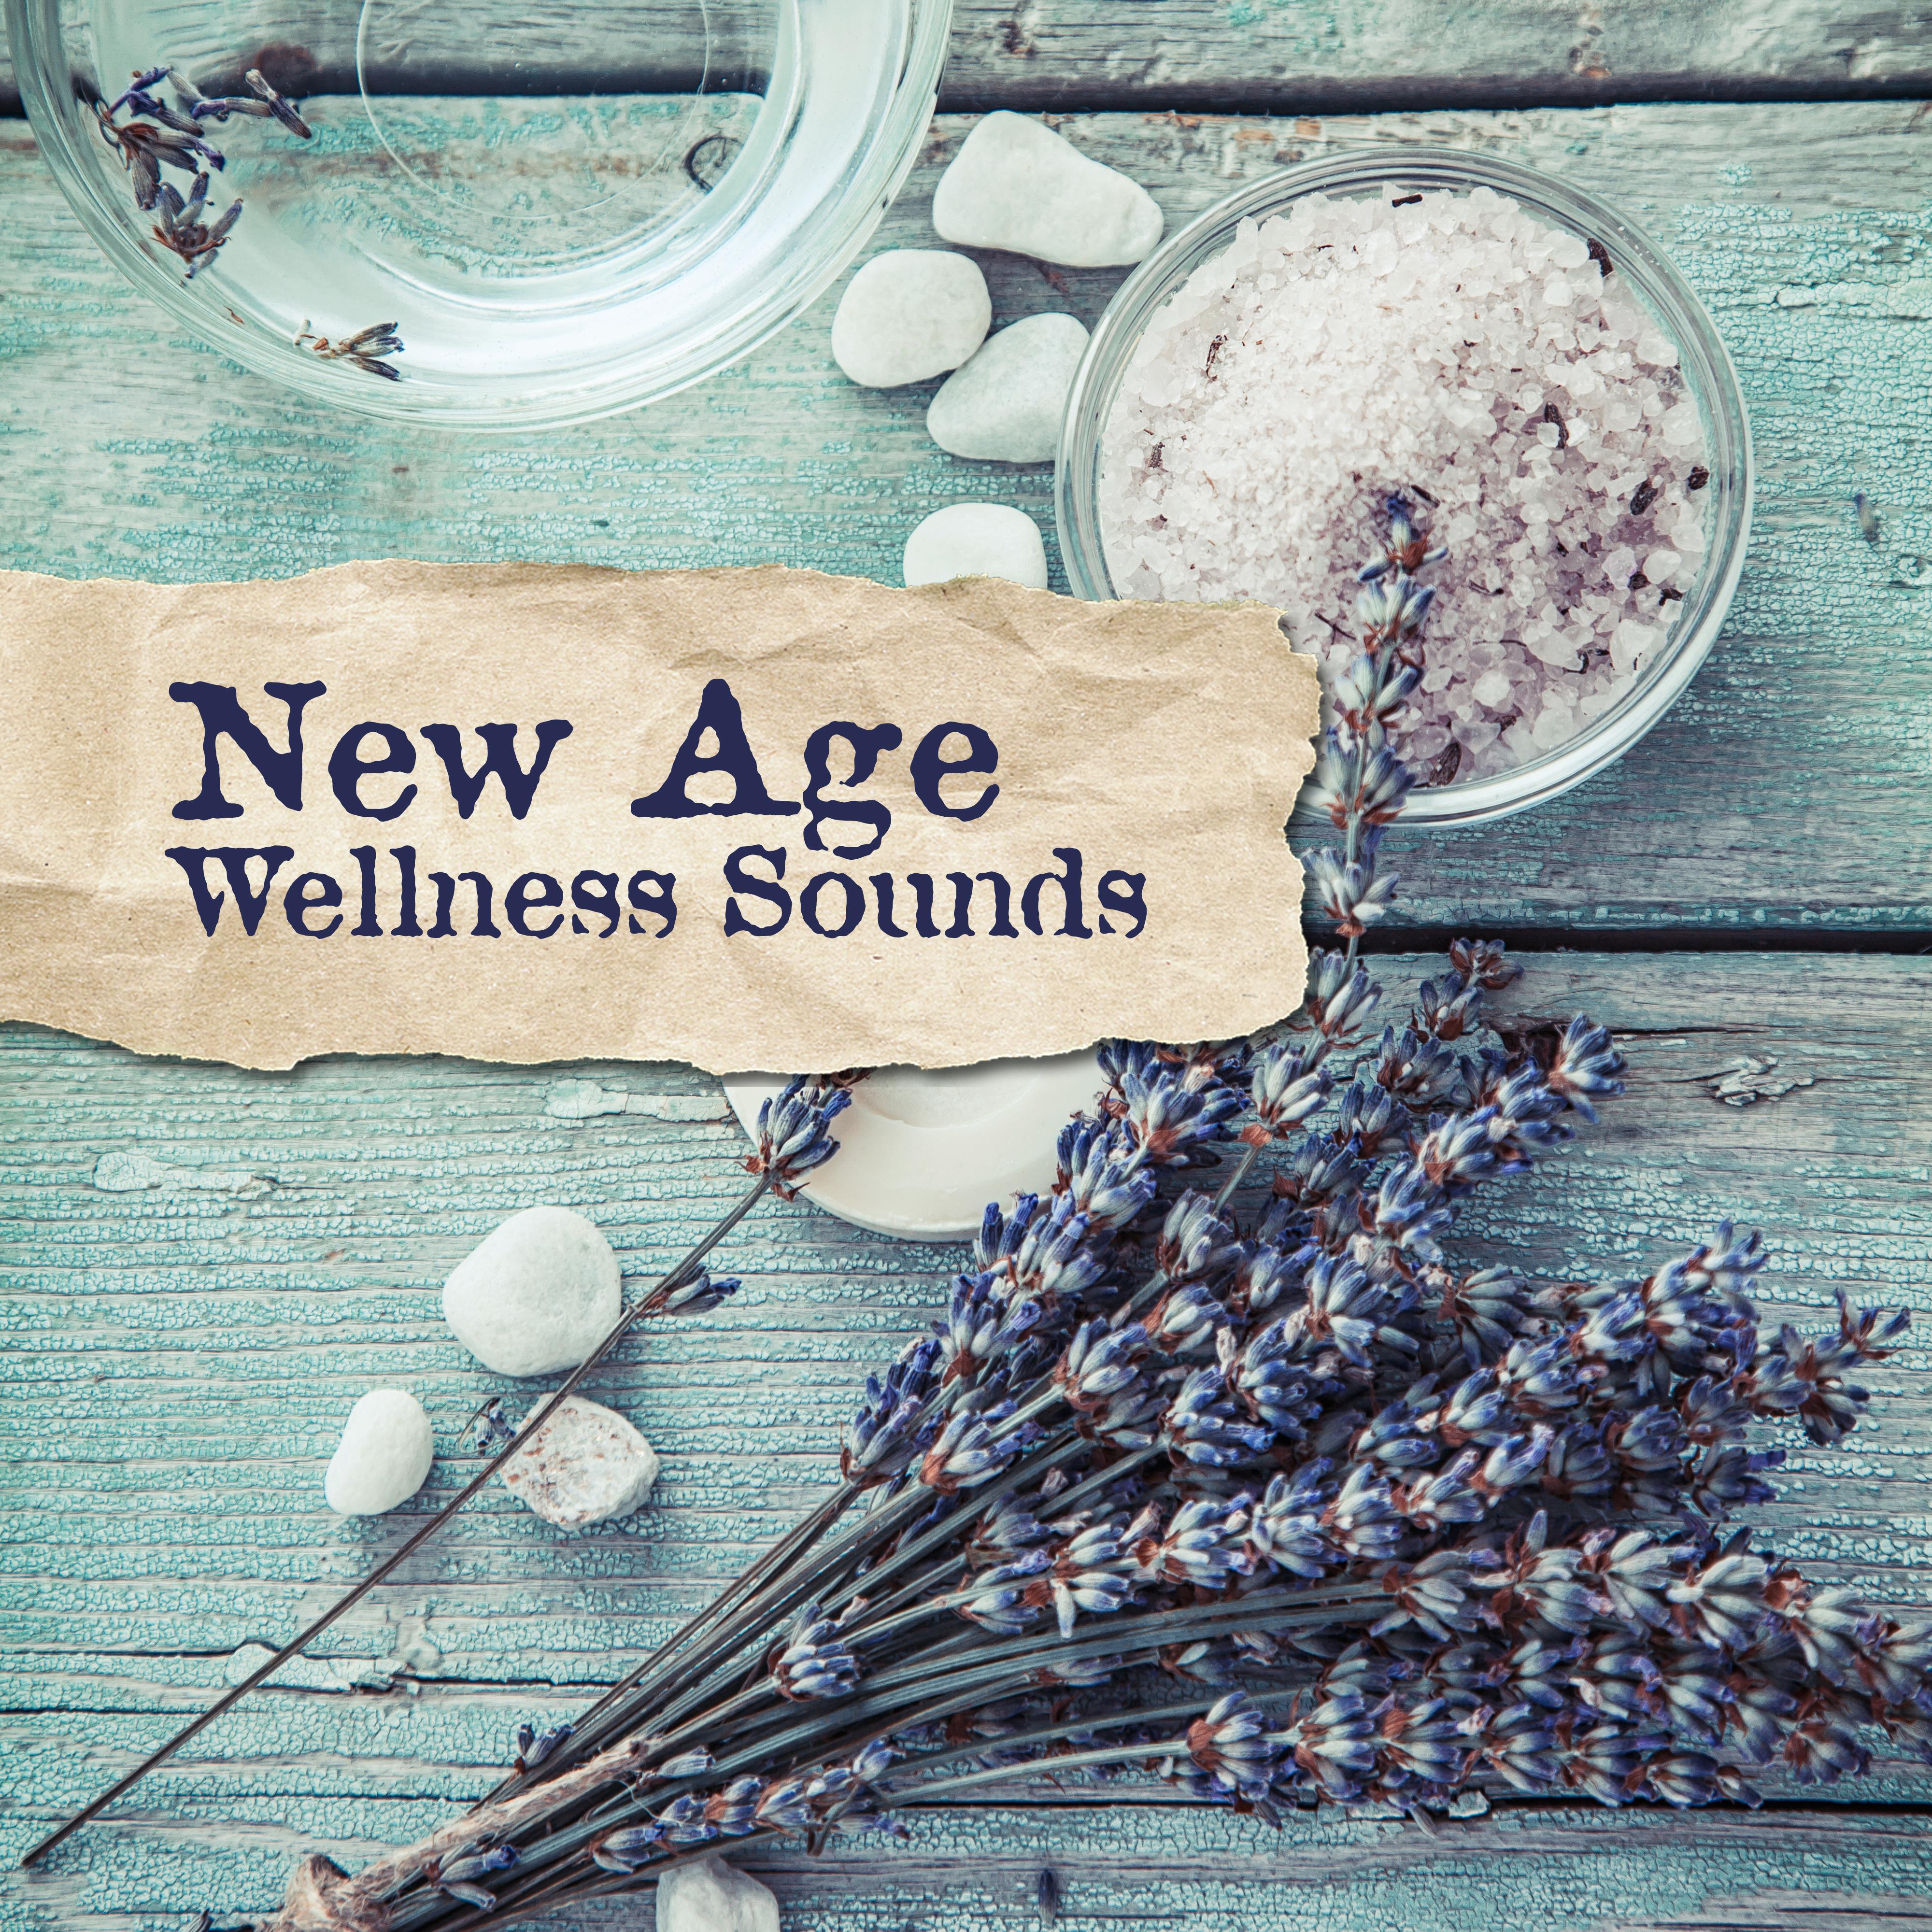 New Age Wellness Sounds: 15 Relaxing 2019 Songs for Spa Salon, Wellness Therapy, Massage Session, Hot Bath & Sauna